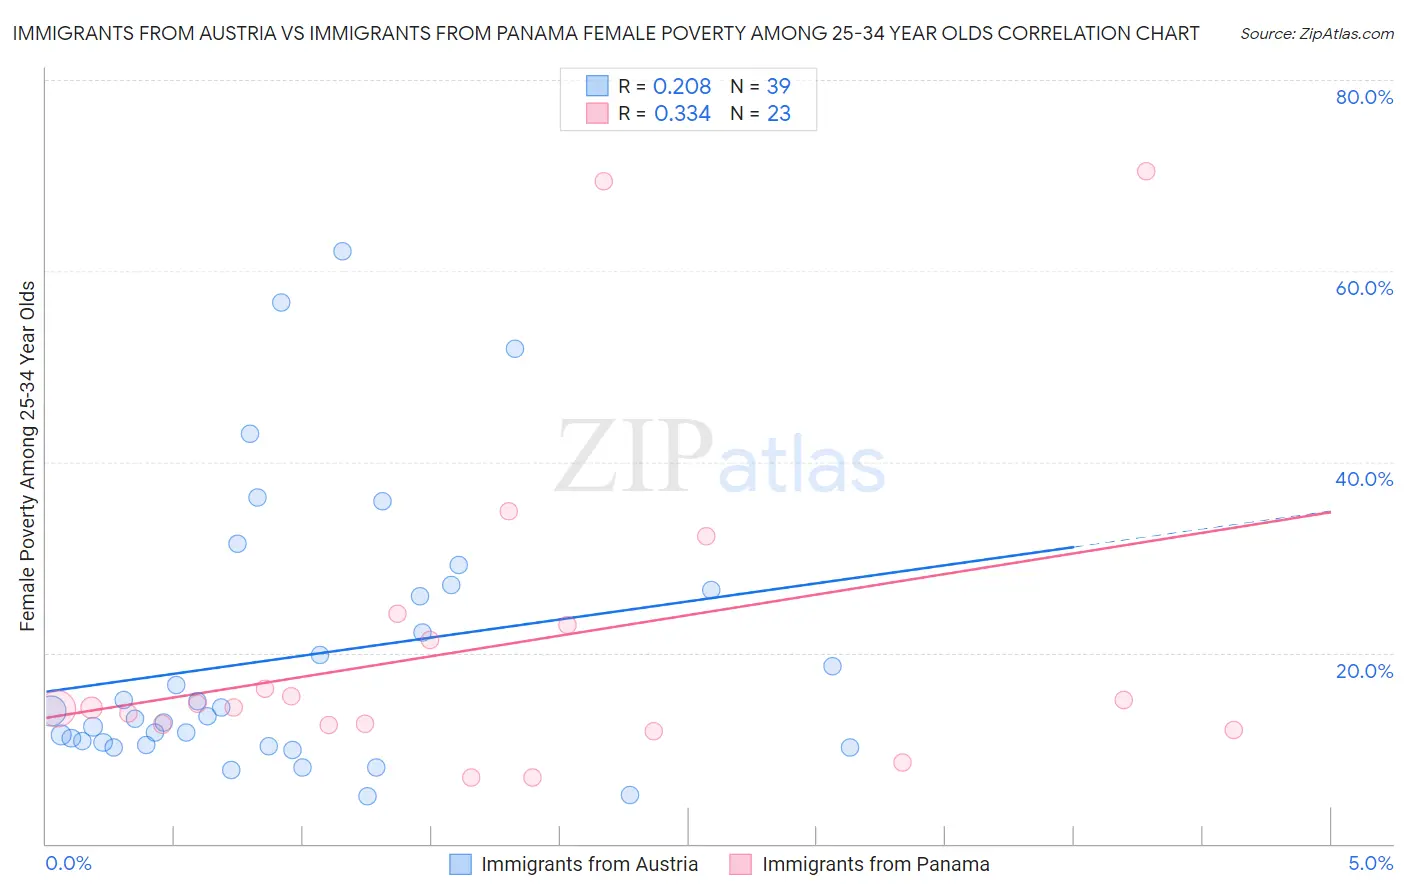 Immigrants from Austria vs Immigrants from Panama Female Poverty Among 25-34 Year Olds